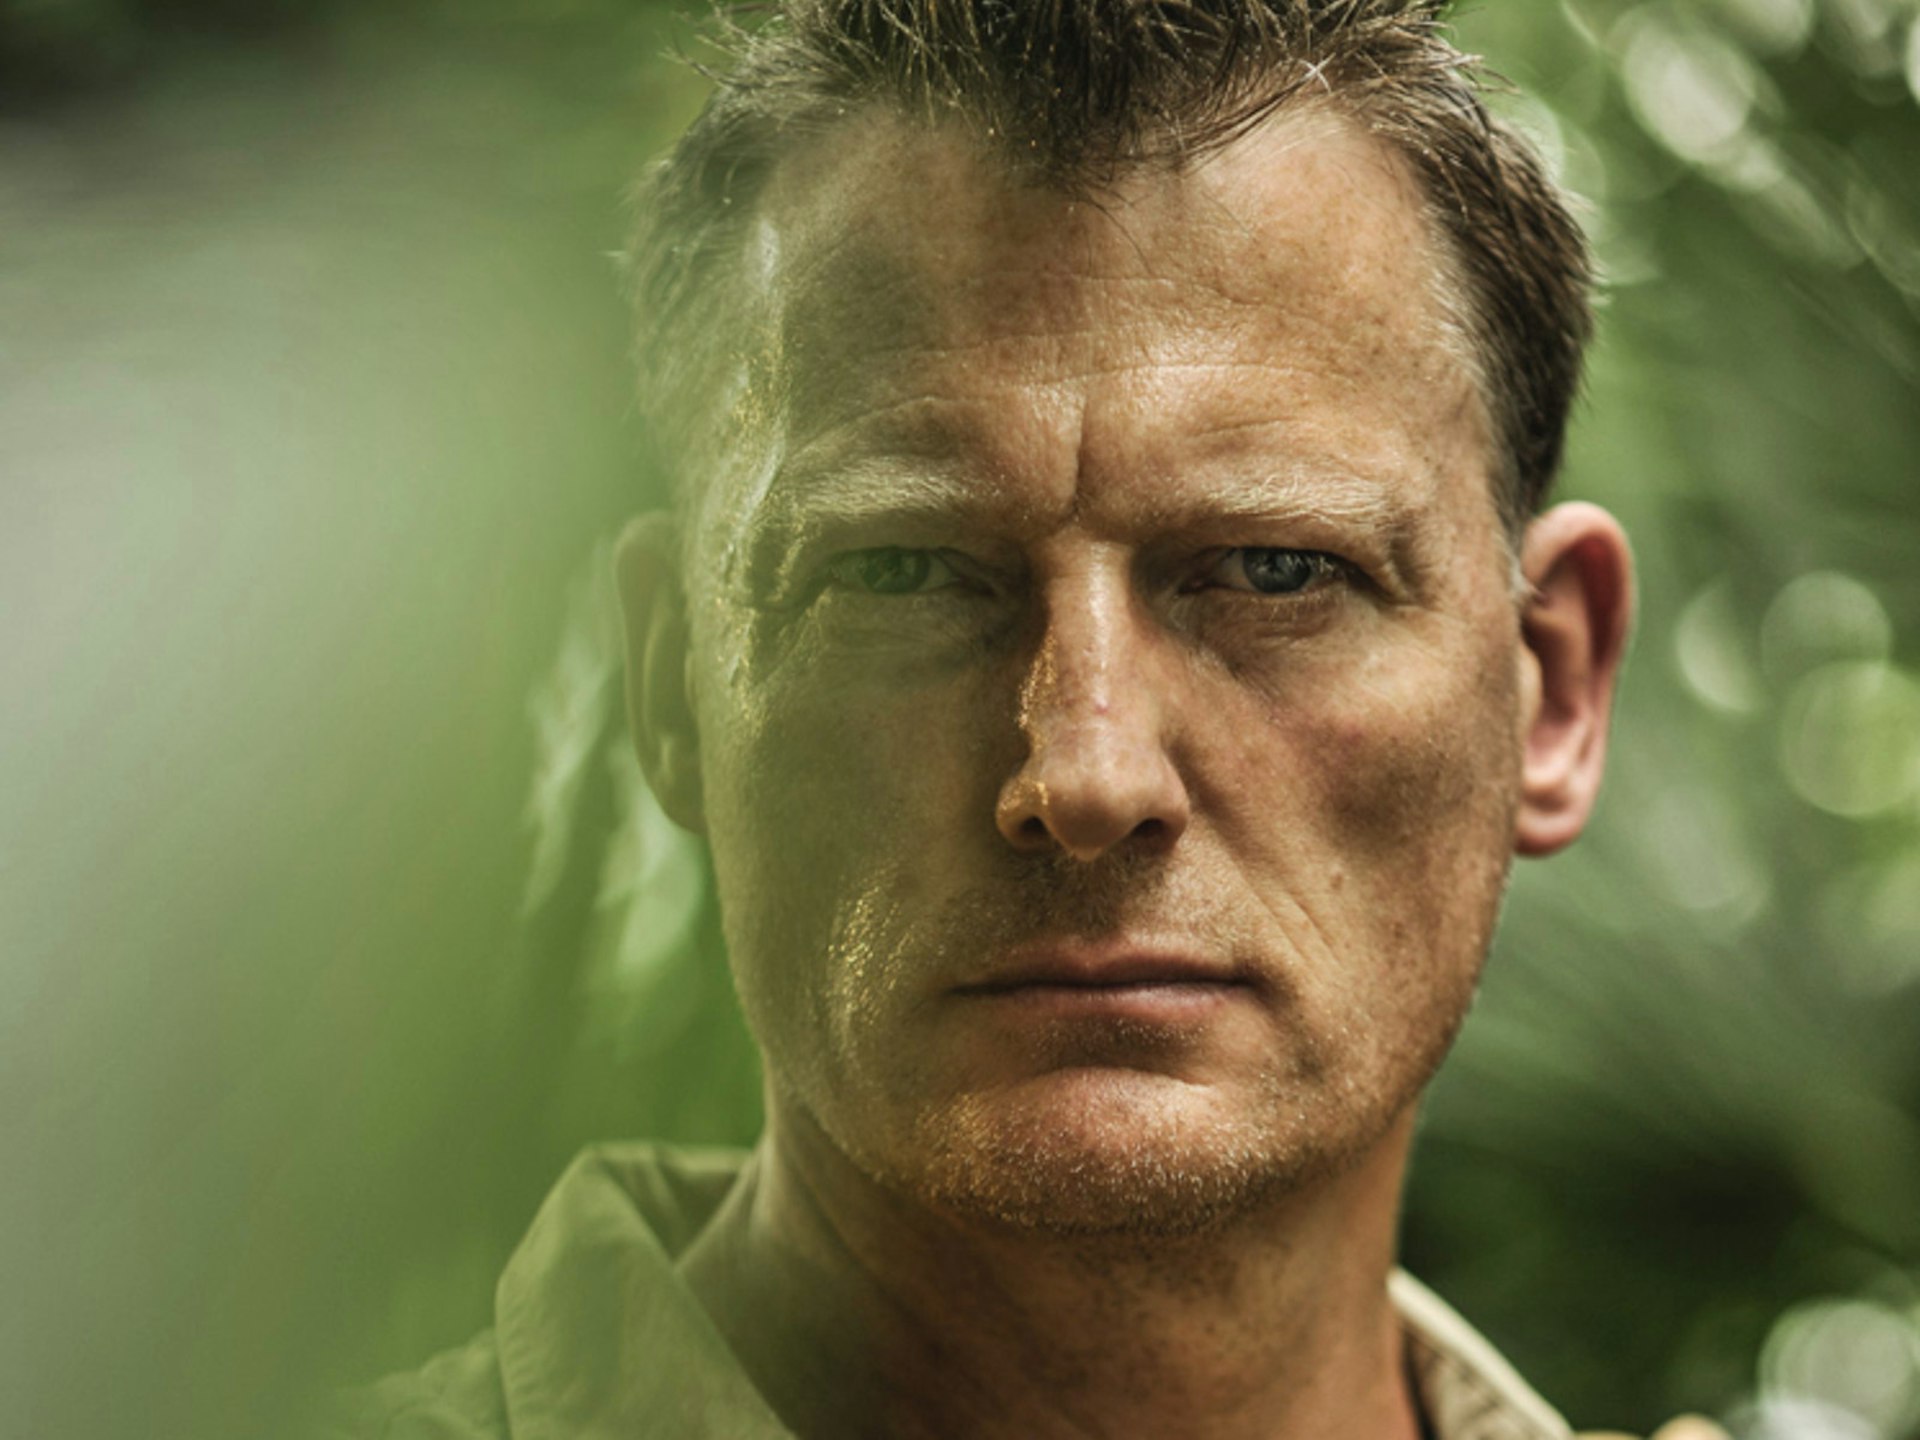 A portrait of adventurer Benedict Allen as though taken in the jungle